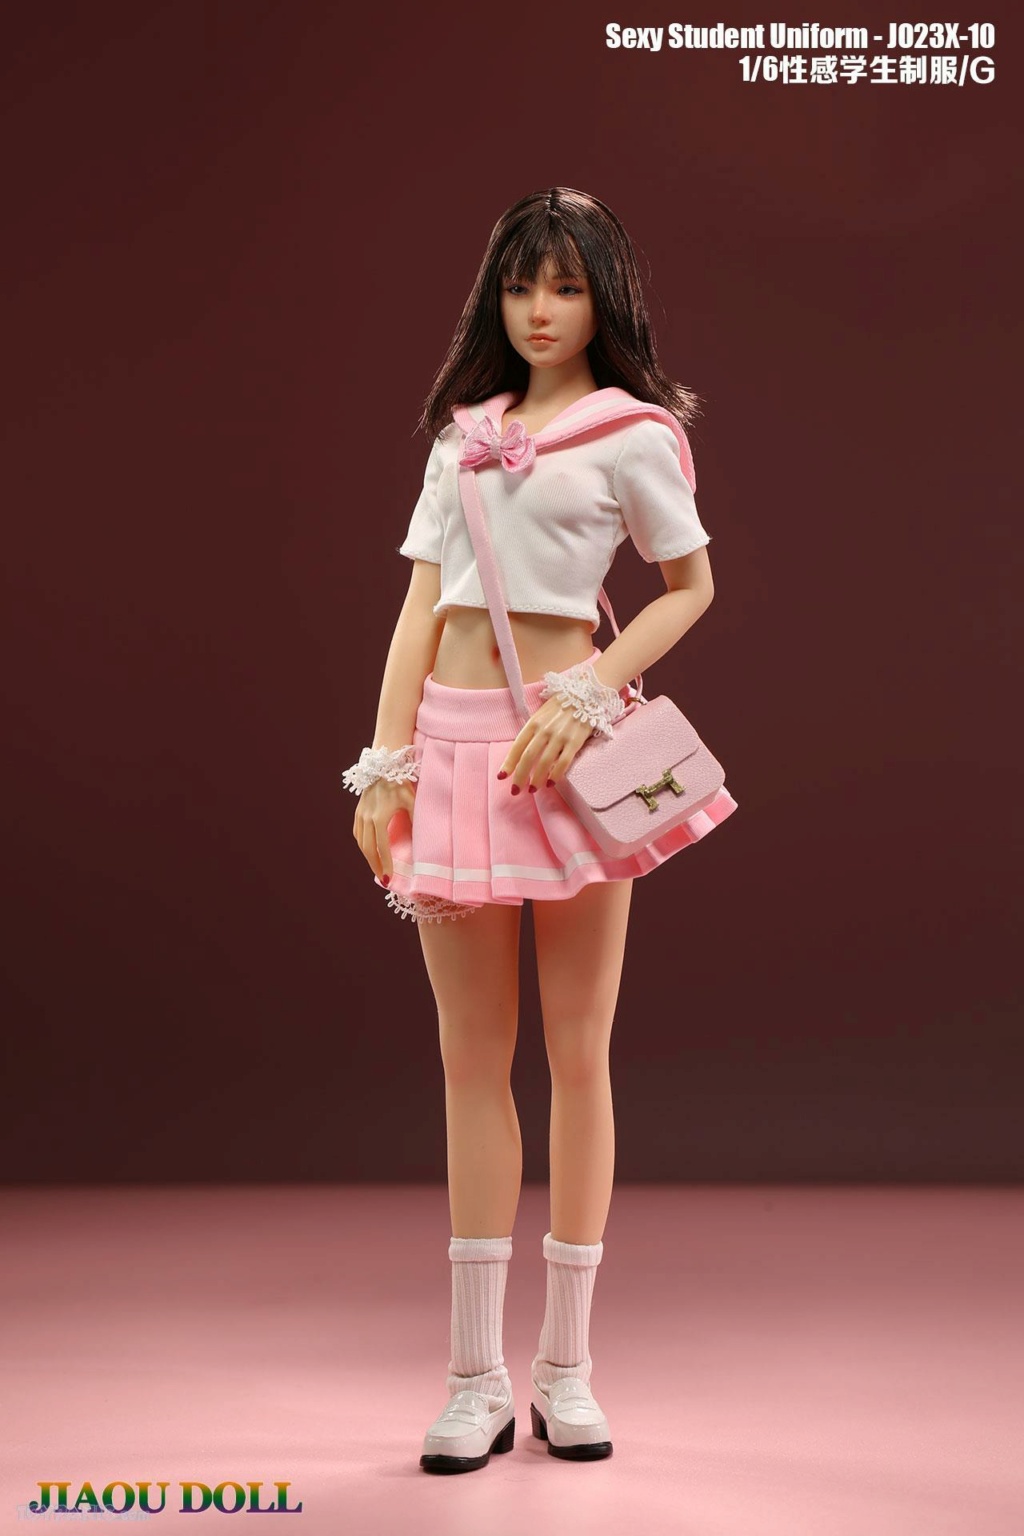 NEW PRODUCT: Jiaou Doll: 1/6 Sexy Student Uniform (7 color options) (JO23X-10A-G) (NSFW) 20920242